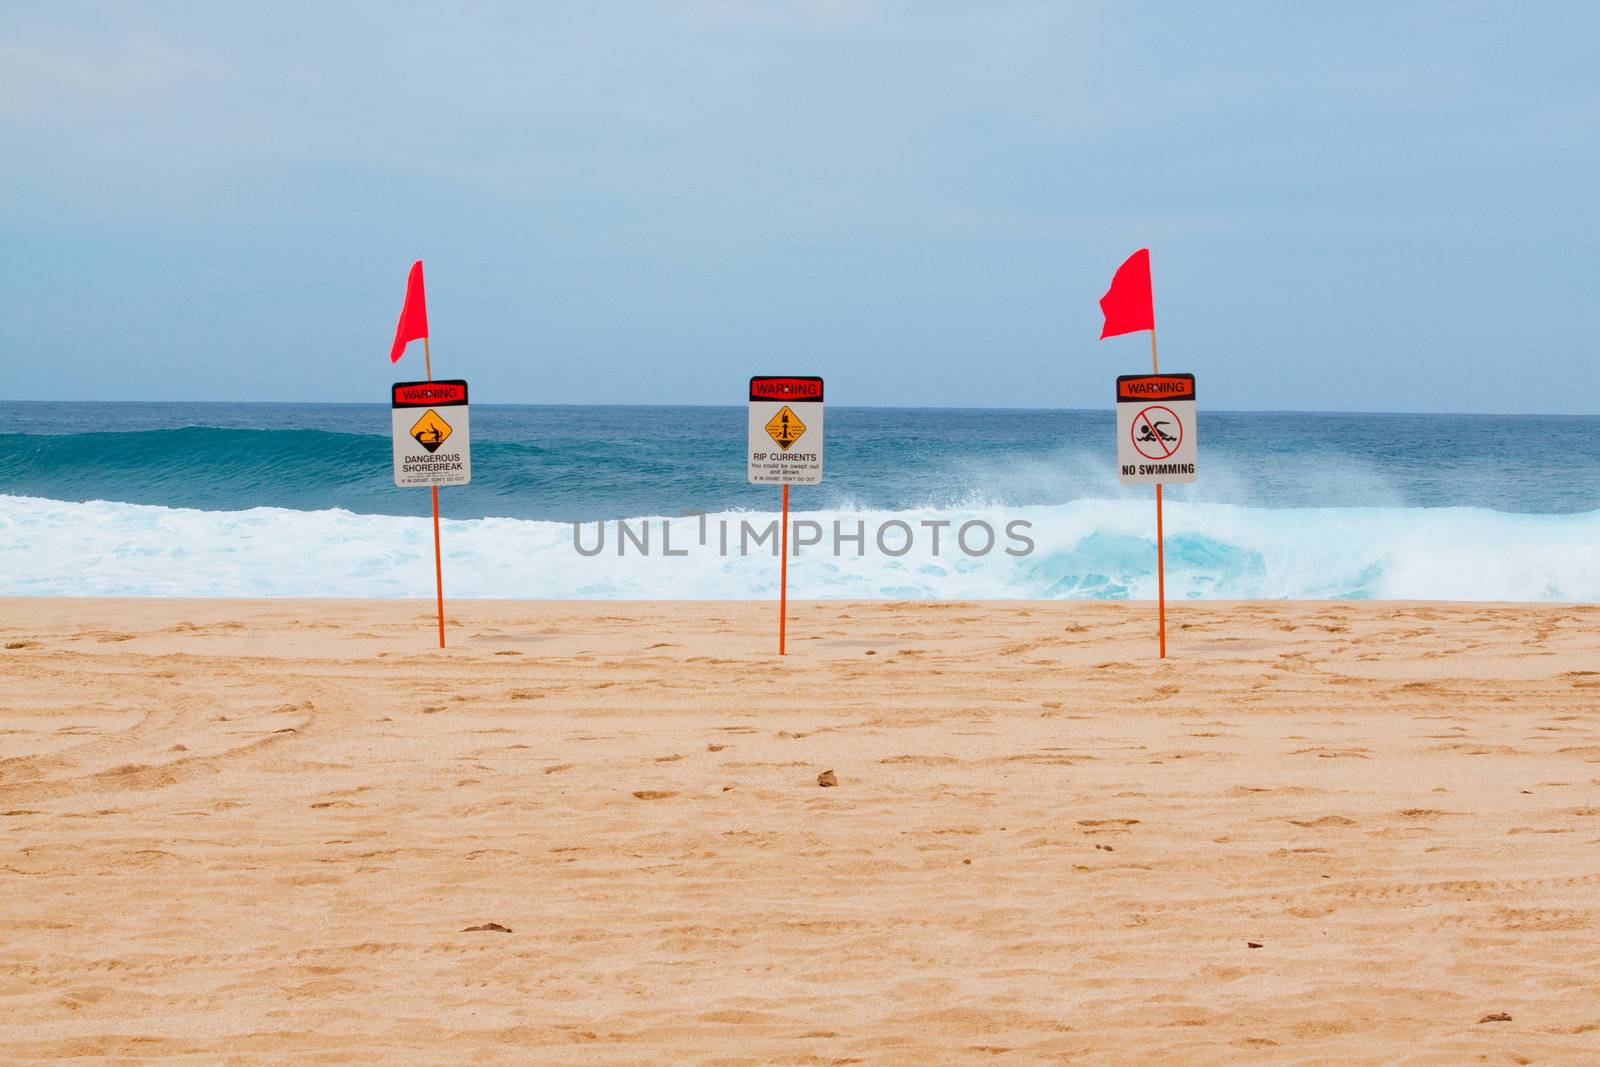 Warning signs mark where there is a very dangerous shore break and rip current along the north shore of Oahu Hawaii.